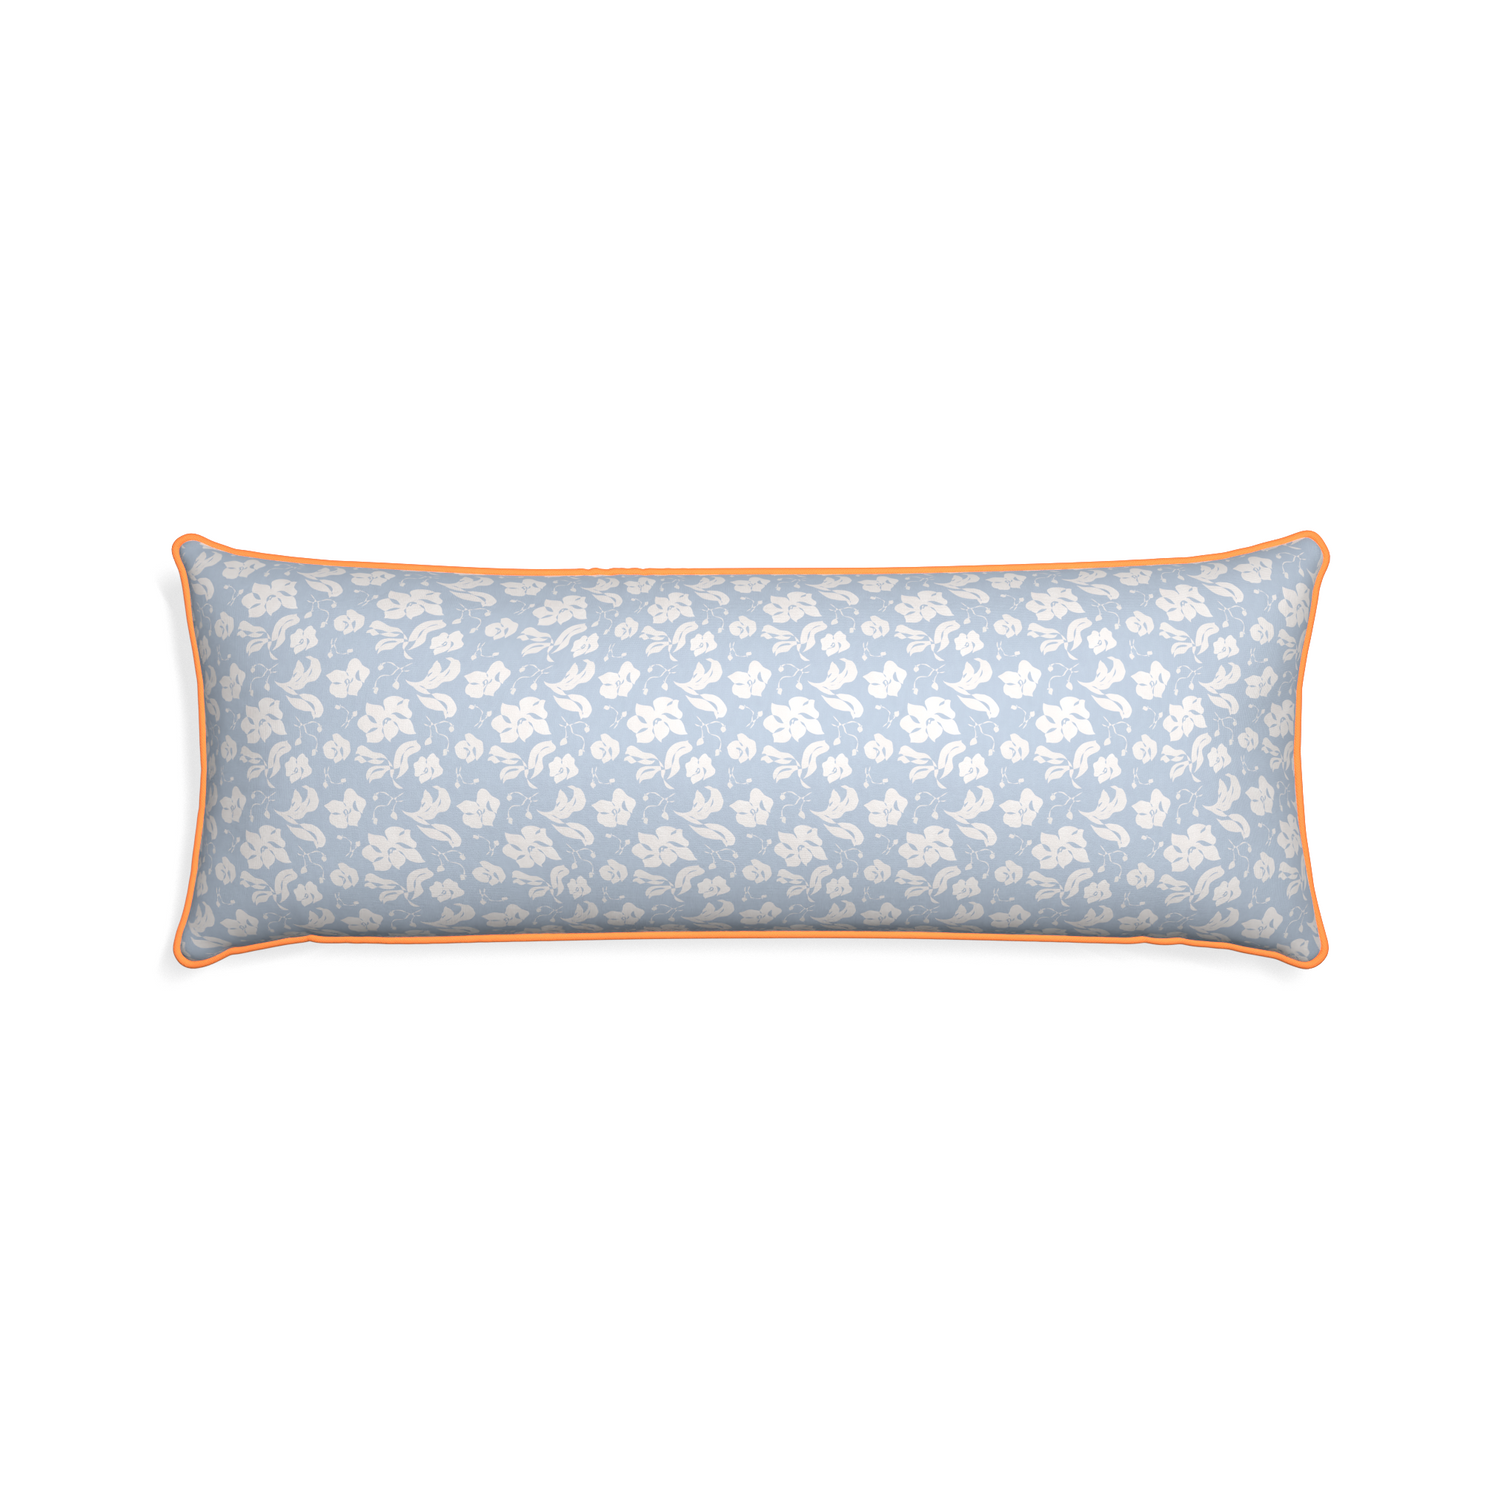 Xl-lumbar georgia custom pillow with clementine piping on white background